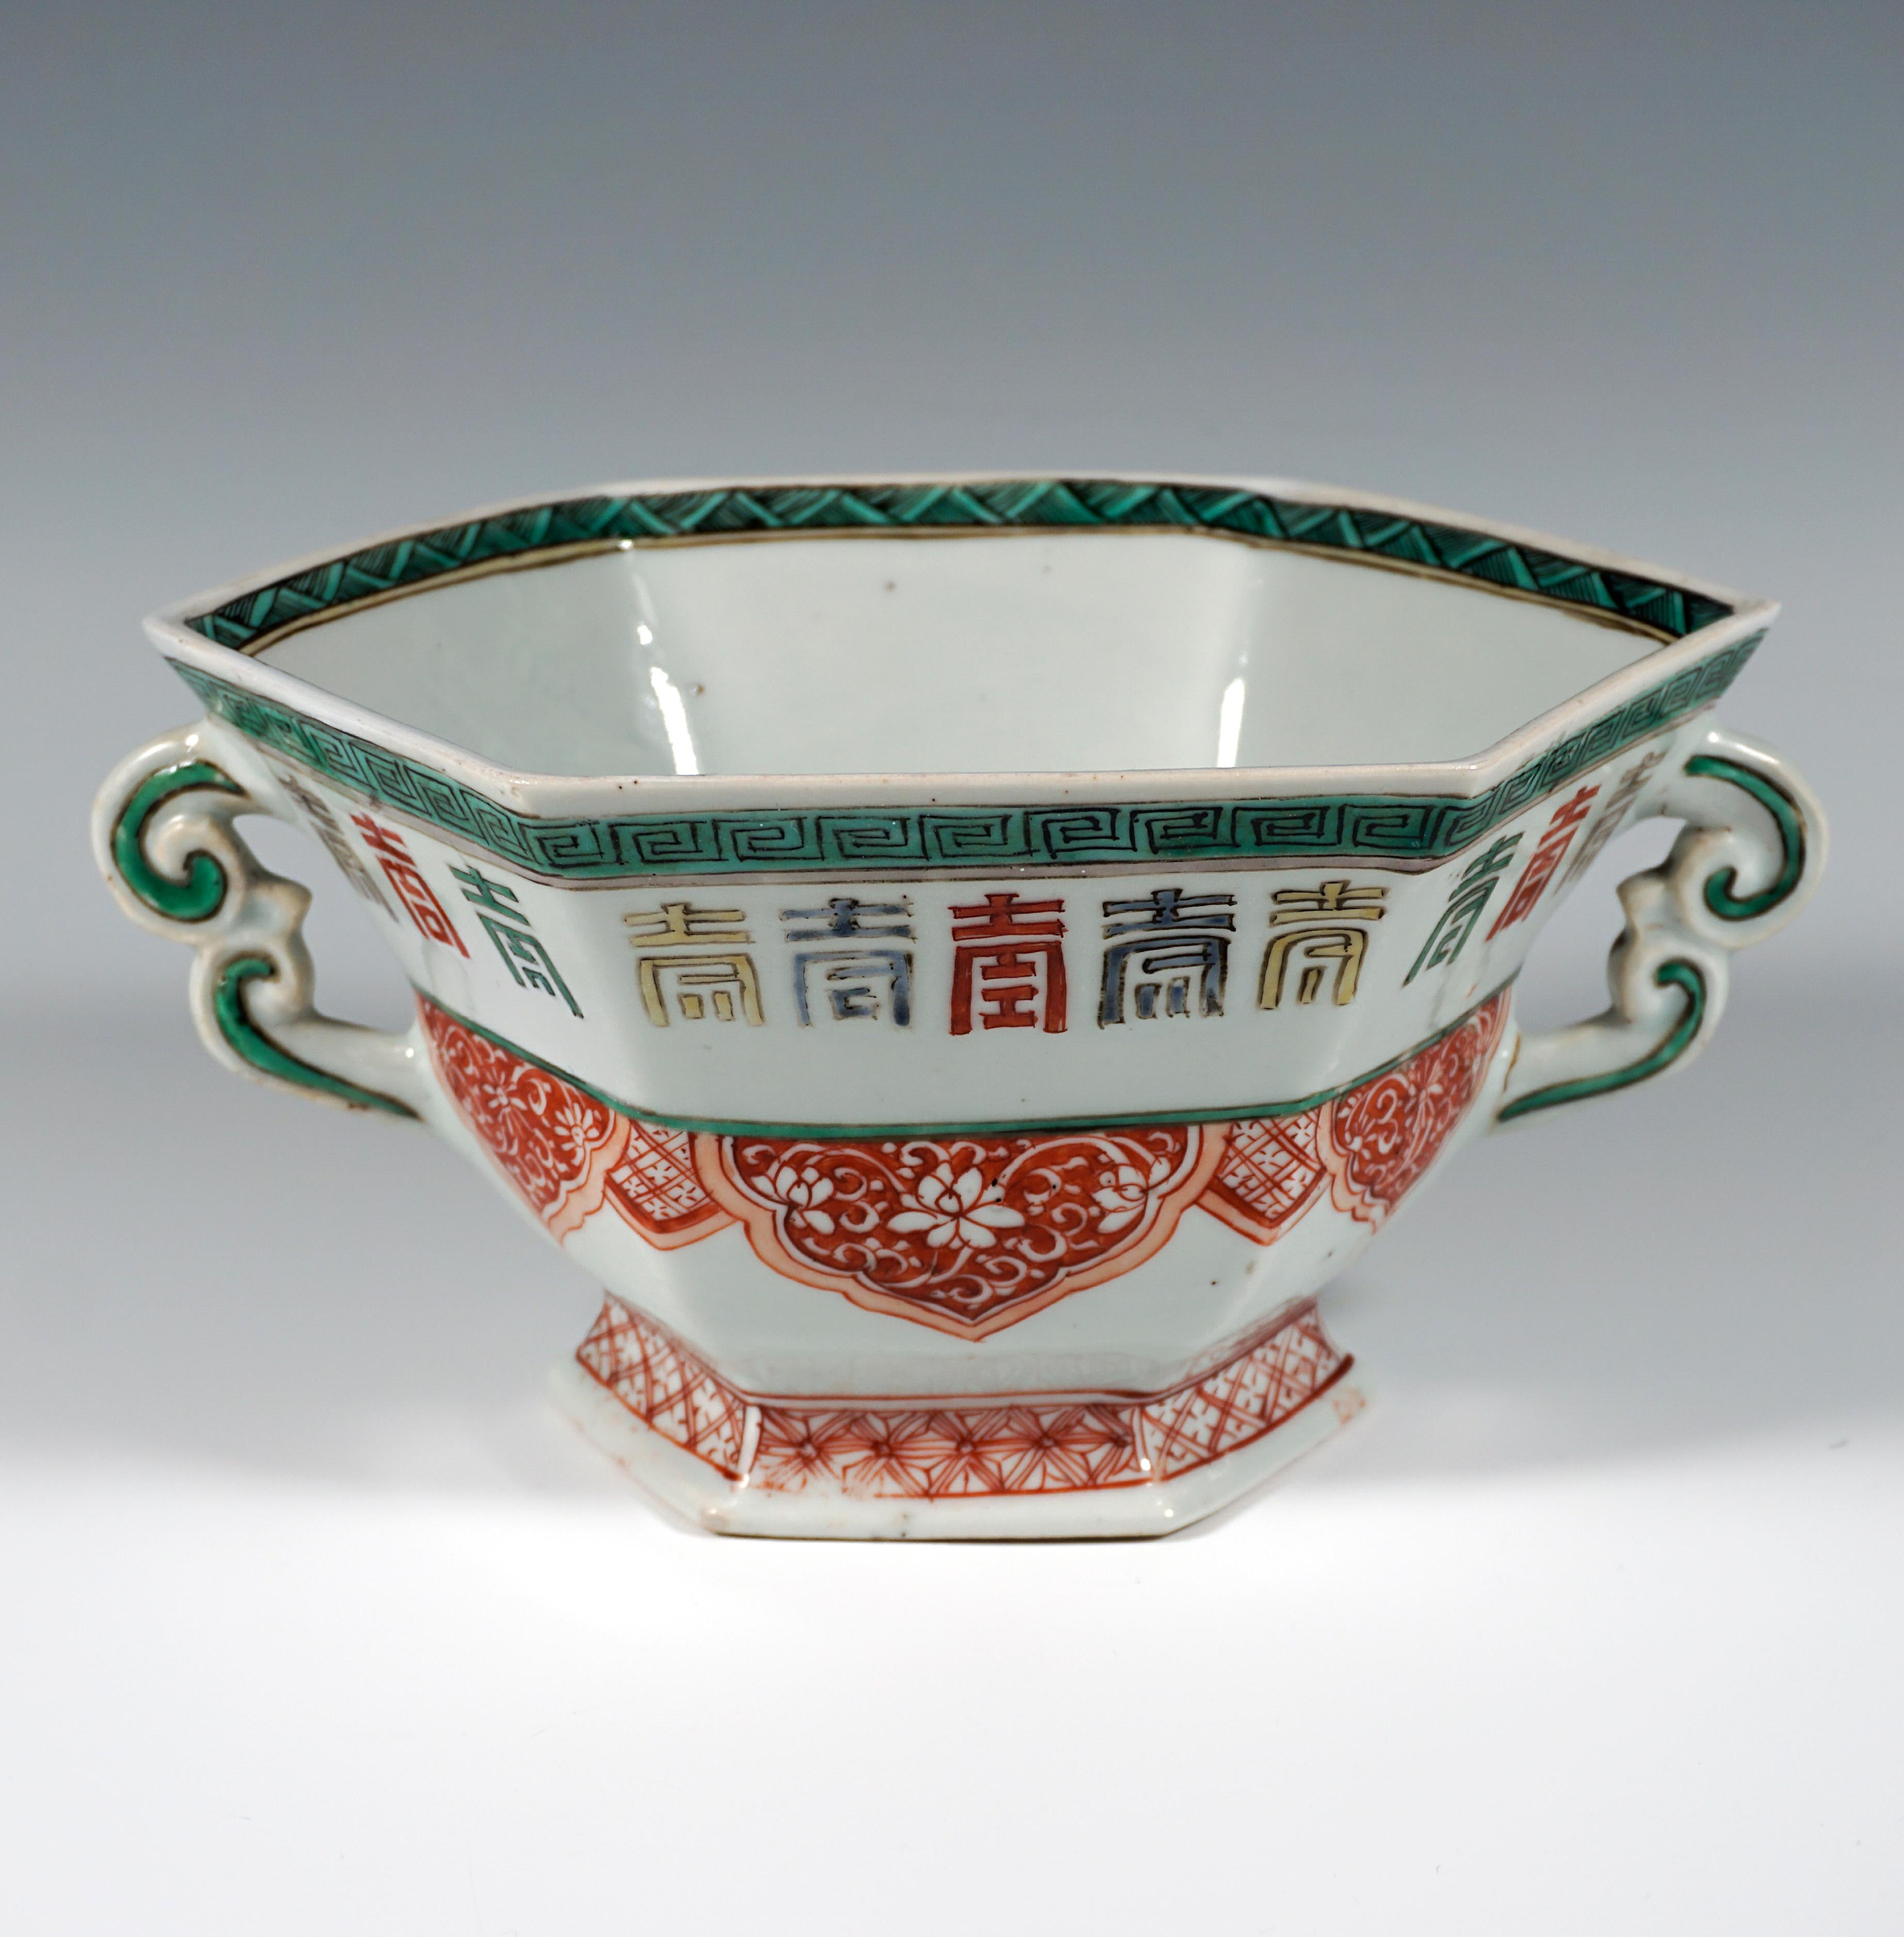 18th Century Museal Early Asian Lidded Tureen With Présentoir, Meissen Germany 1740-1780 For Sale